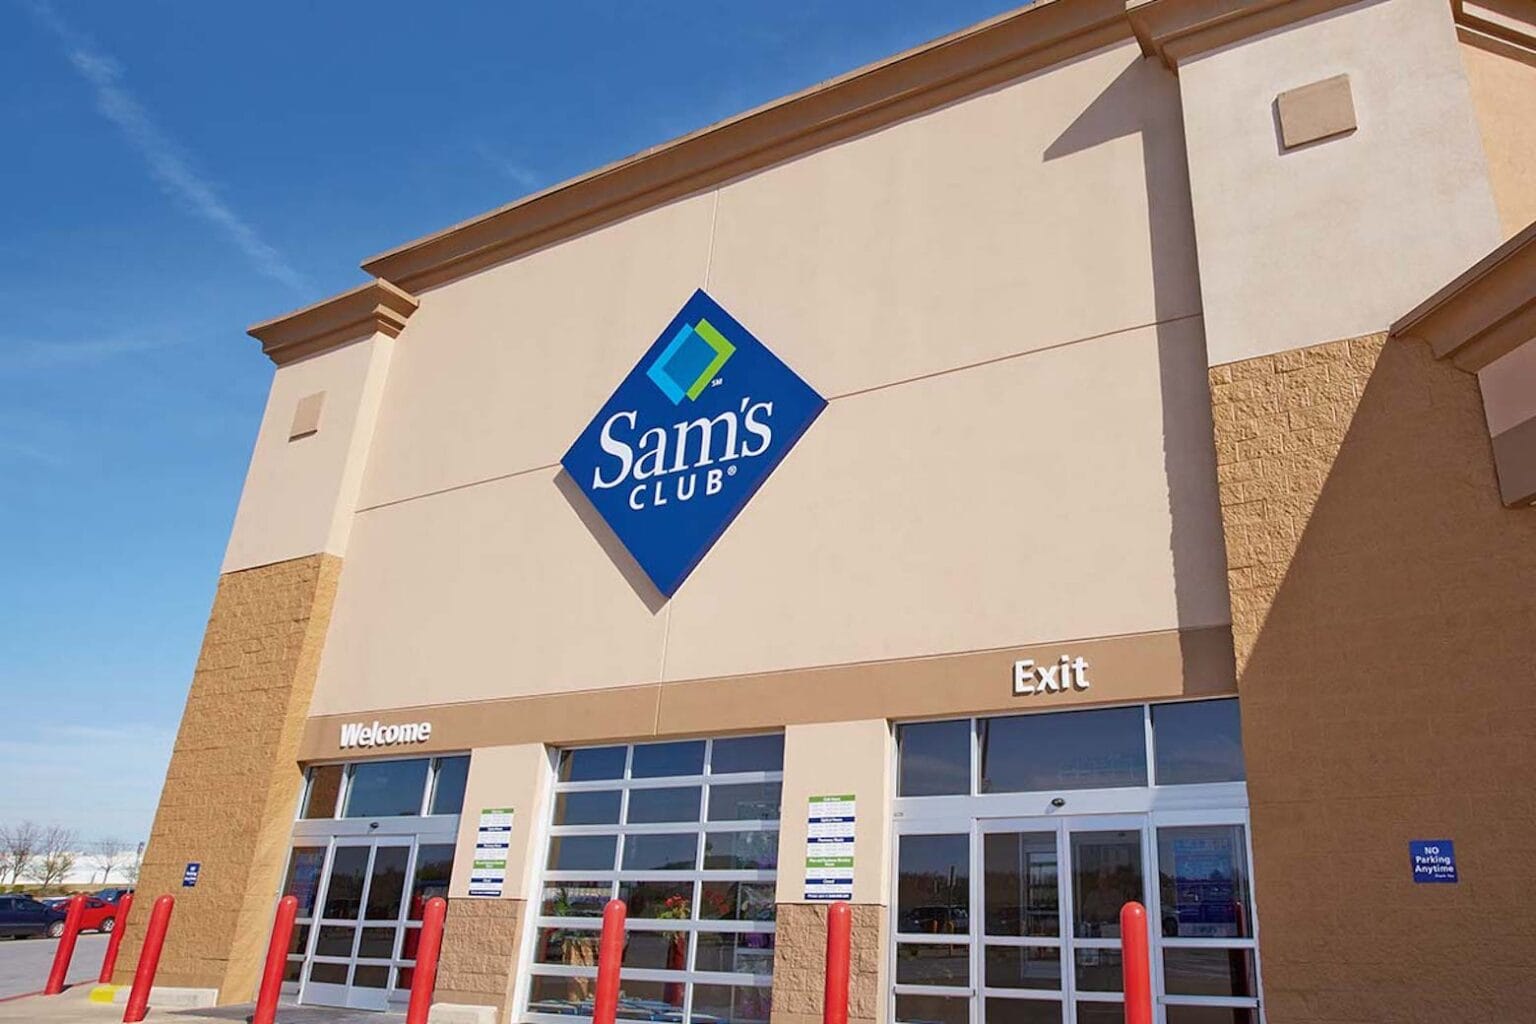 For $15, buy in bulk and save with this Sam's Club membership.